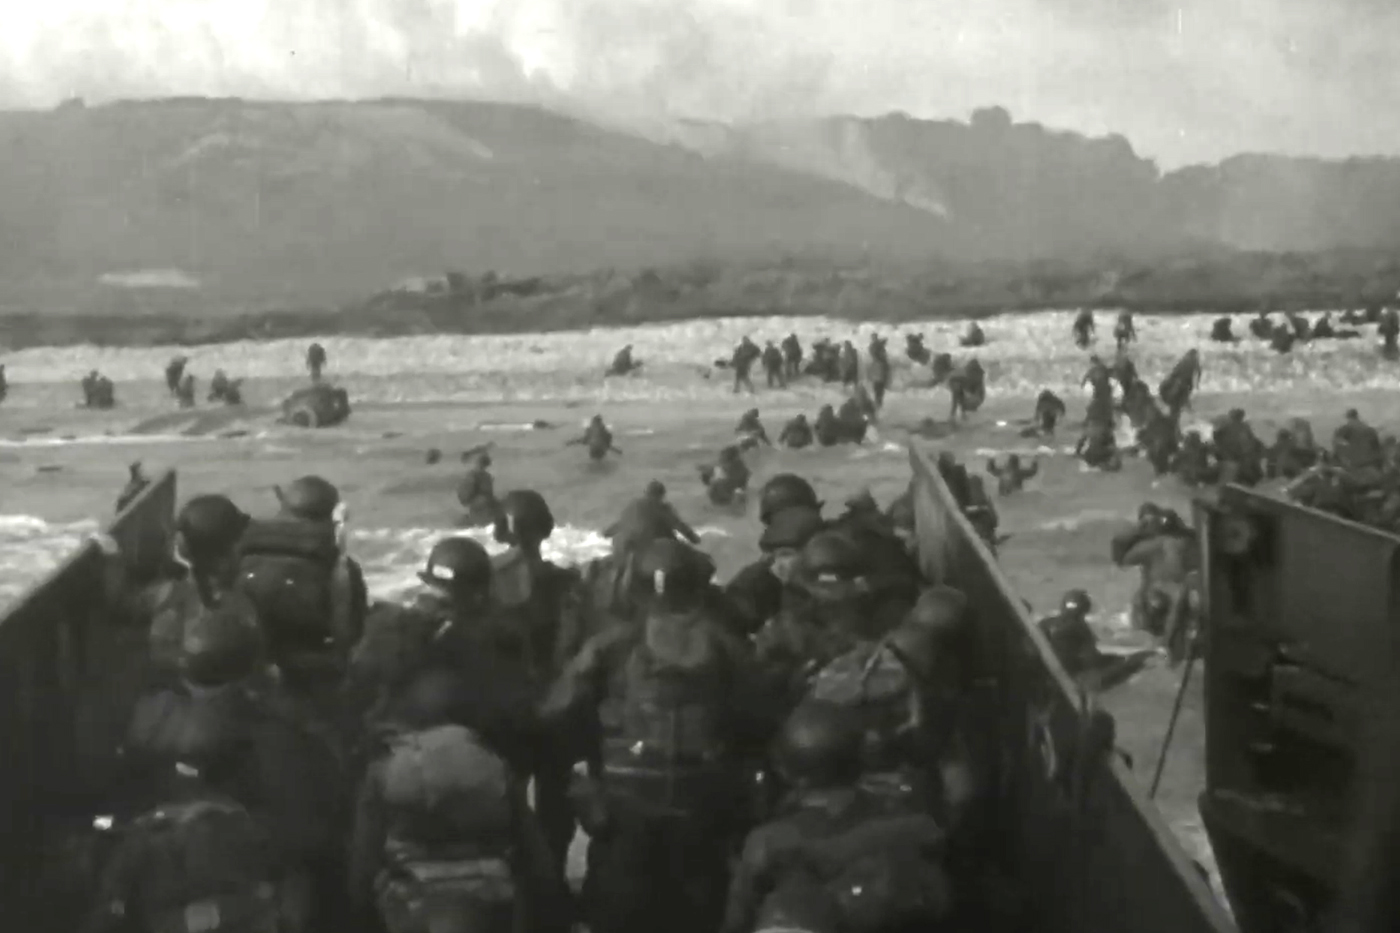 Remembering D-Day 75 years later - News @ Northeastern